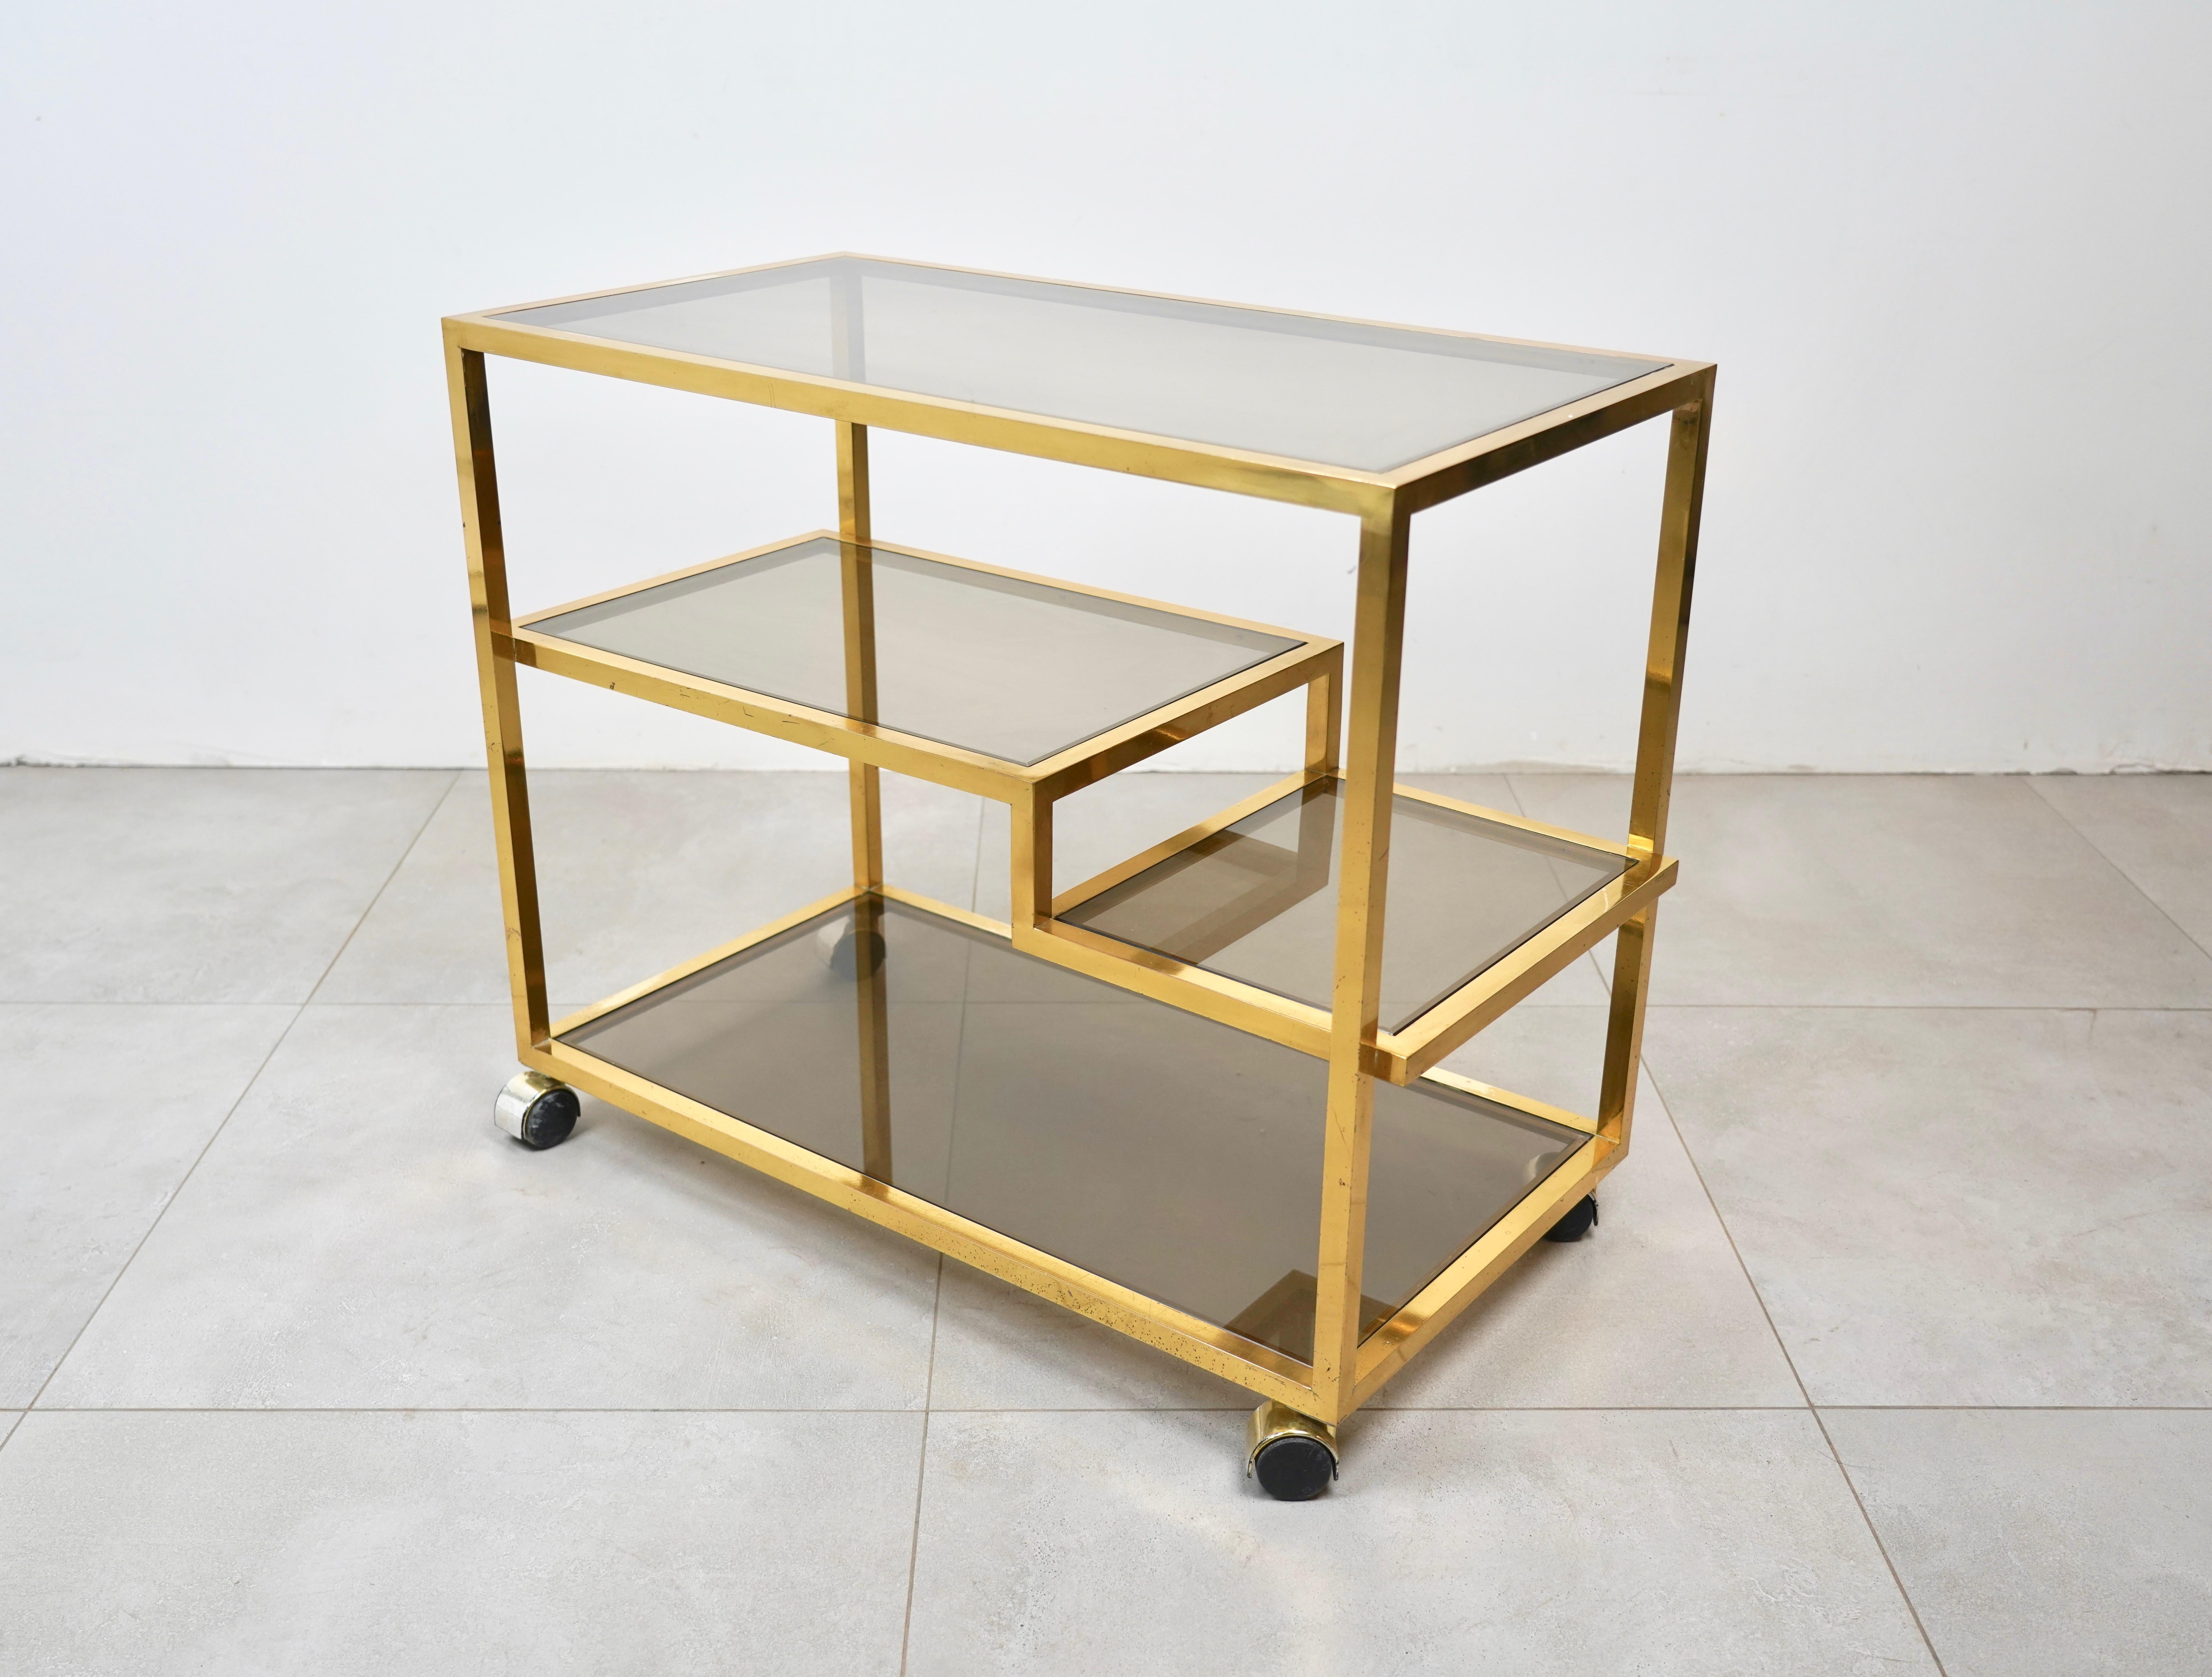 This vintage brass and smoked glass serving cart features unique midcentury design, combining simple lines and plenty of room for storage or service. In the style of to the Italian designer Romeo Rega. Made in Italy in the 1970s.